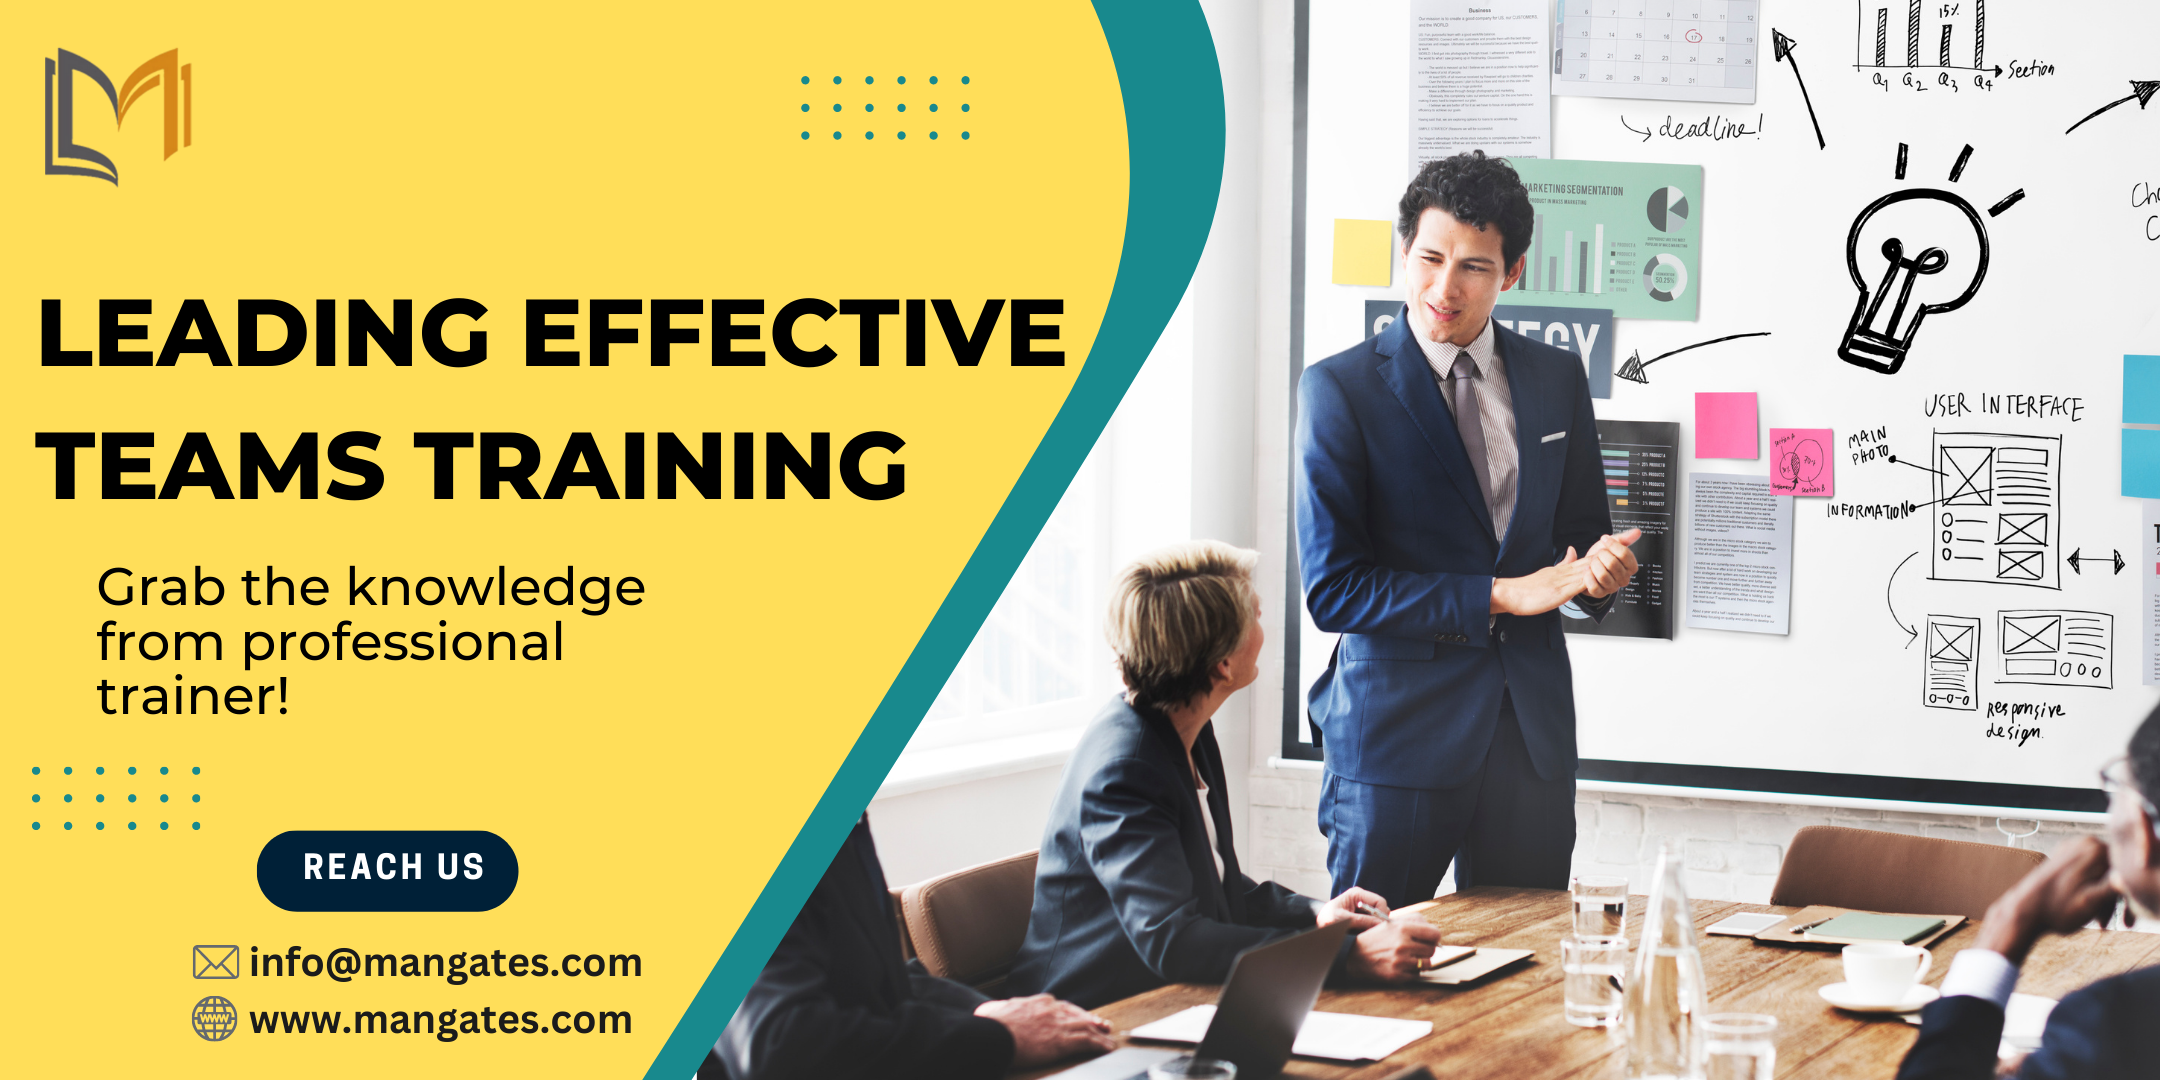 Leading Effective Teams 1 Day Training in Bristol